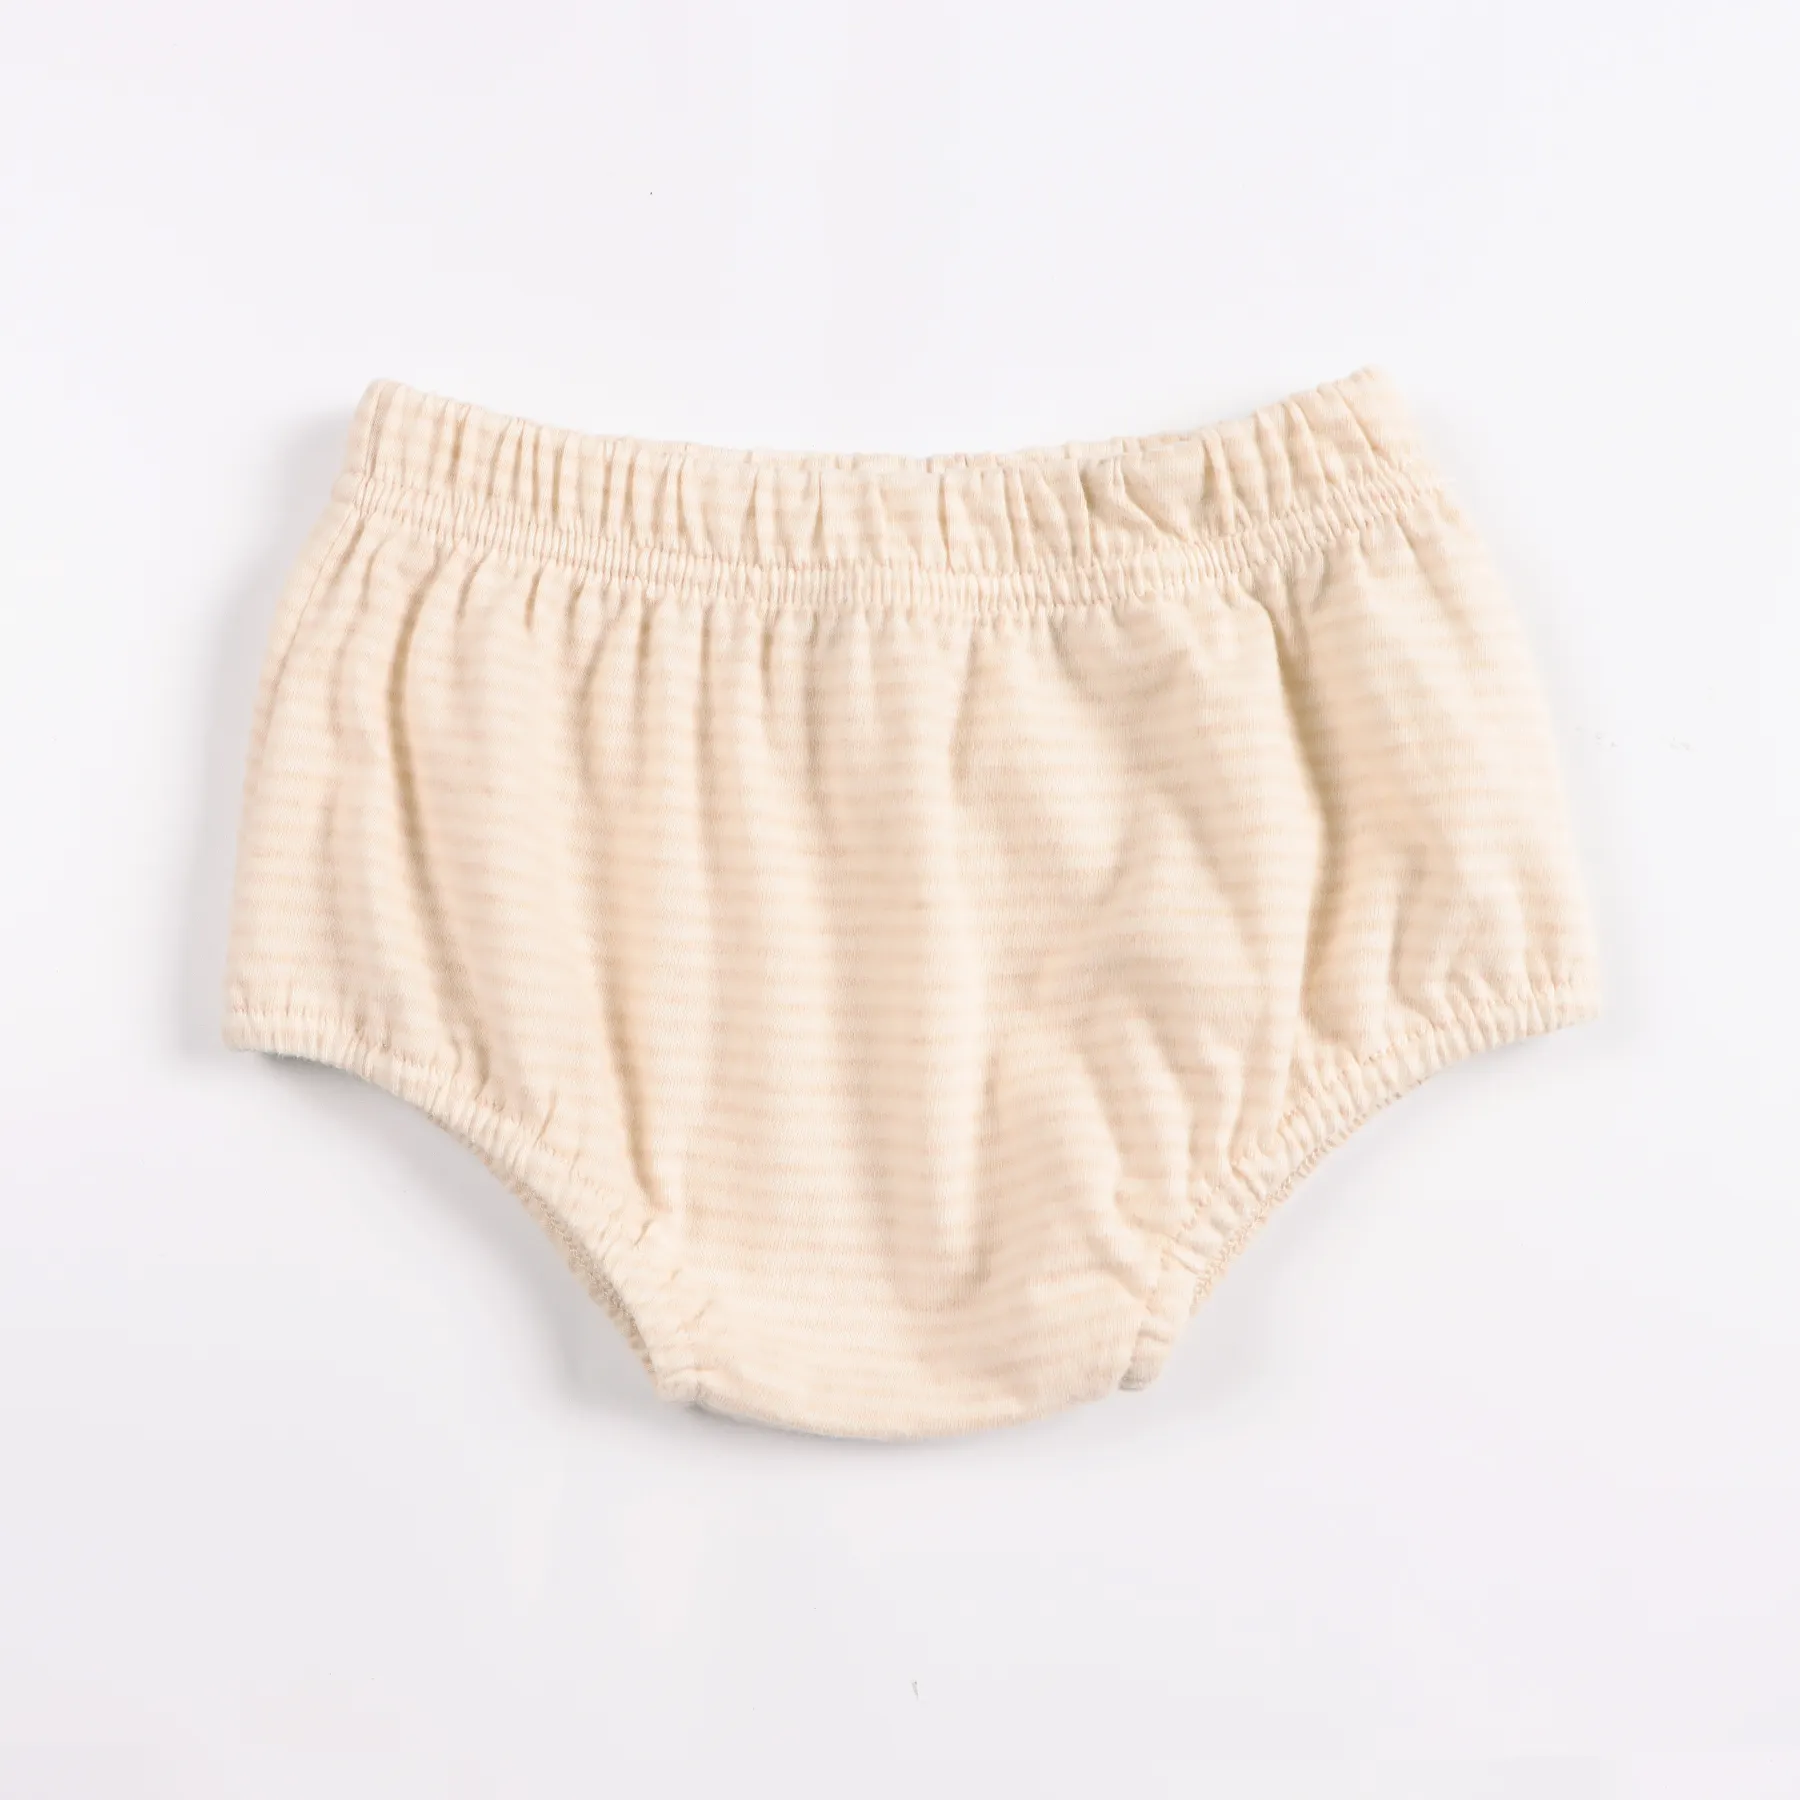 Baby Bloomers Infant Vintage Soft Diaper Short Pants Summer ORGANIC Knitting 100% Organic Cotton Support Unisex Boys and Girls